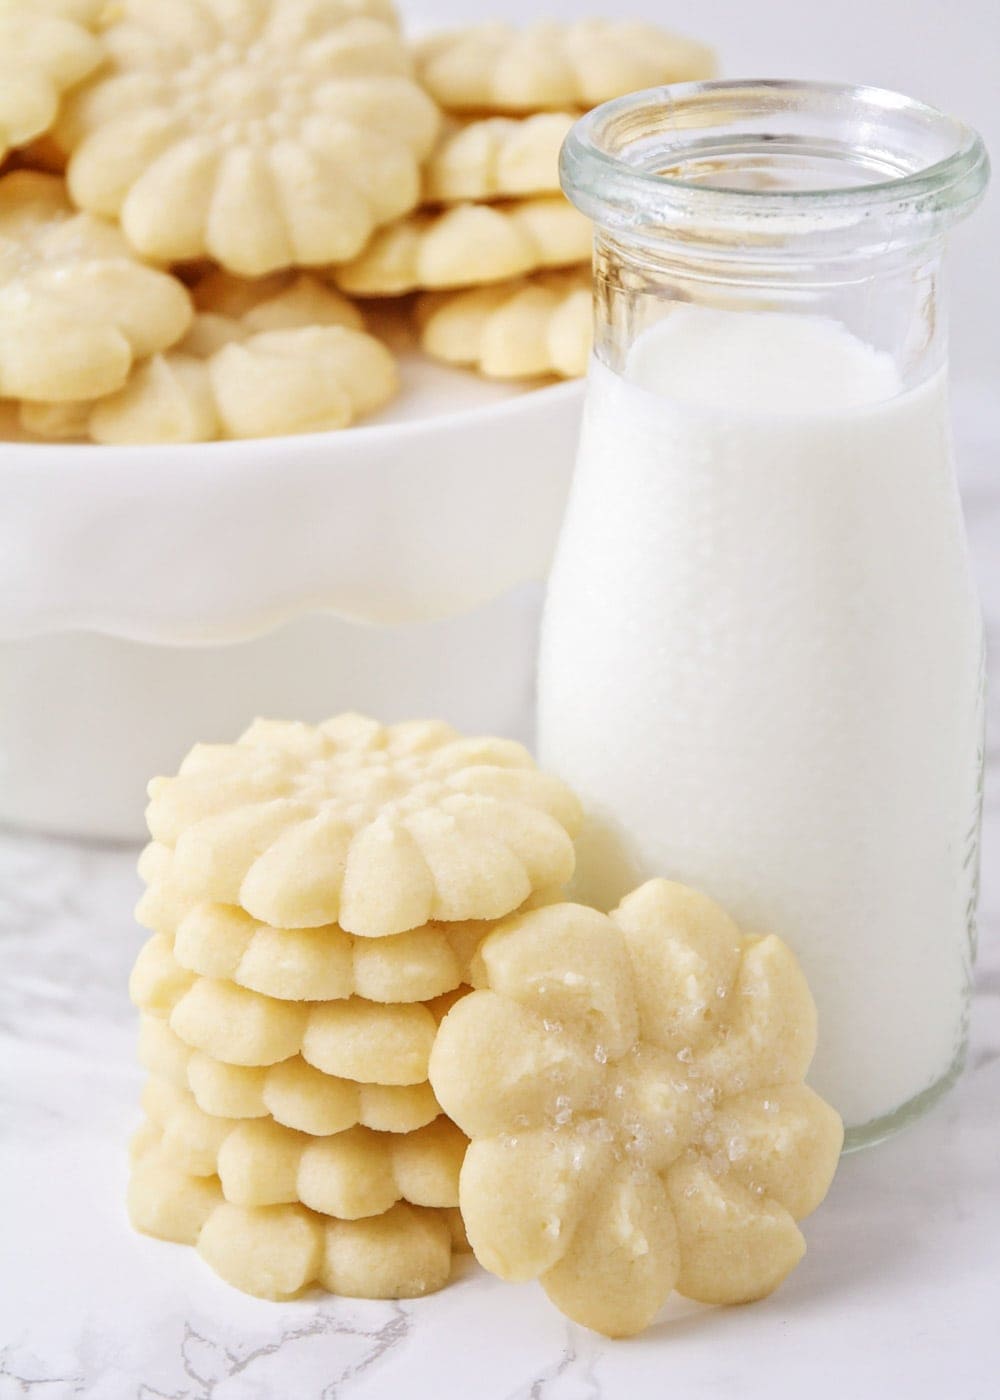 A stack of classic shortbread cookies next to a glass of milk